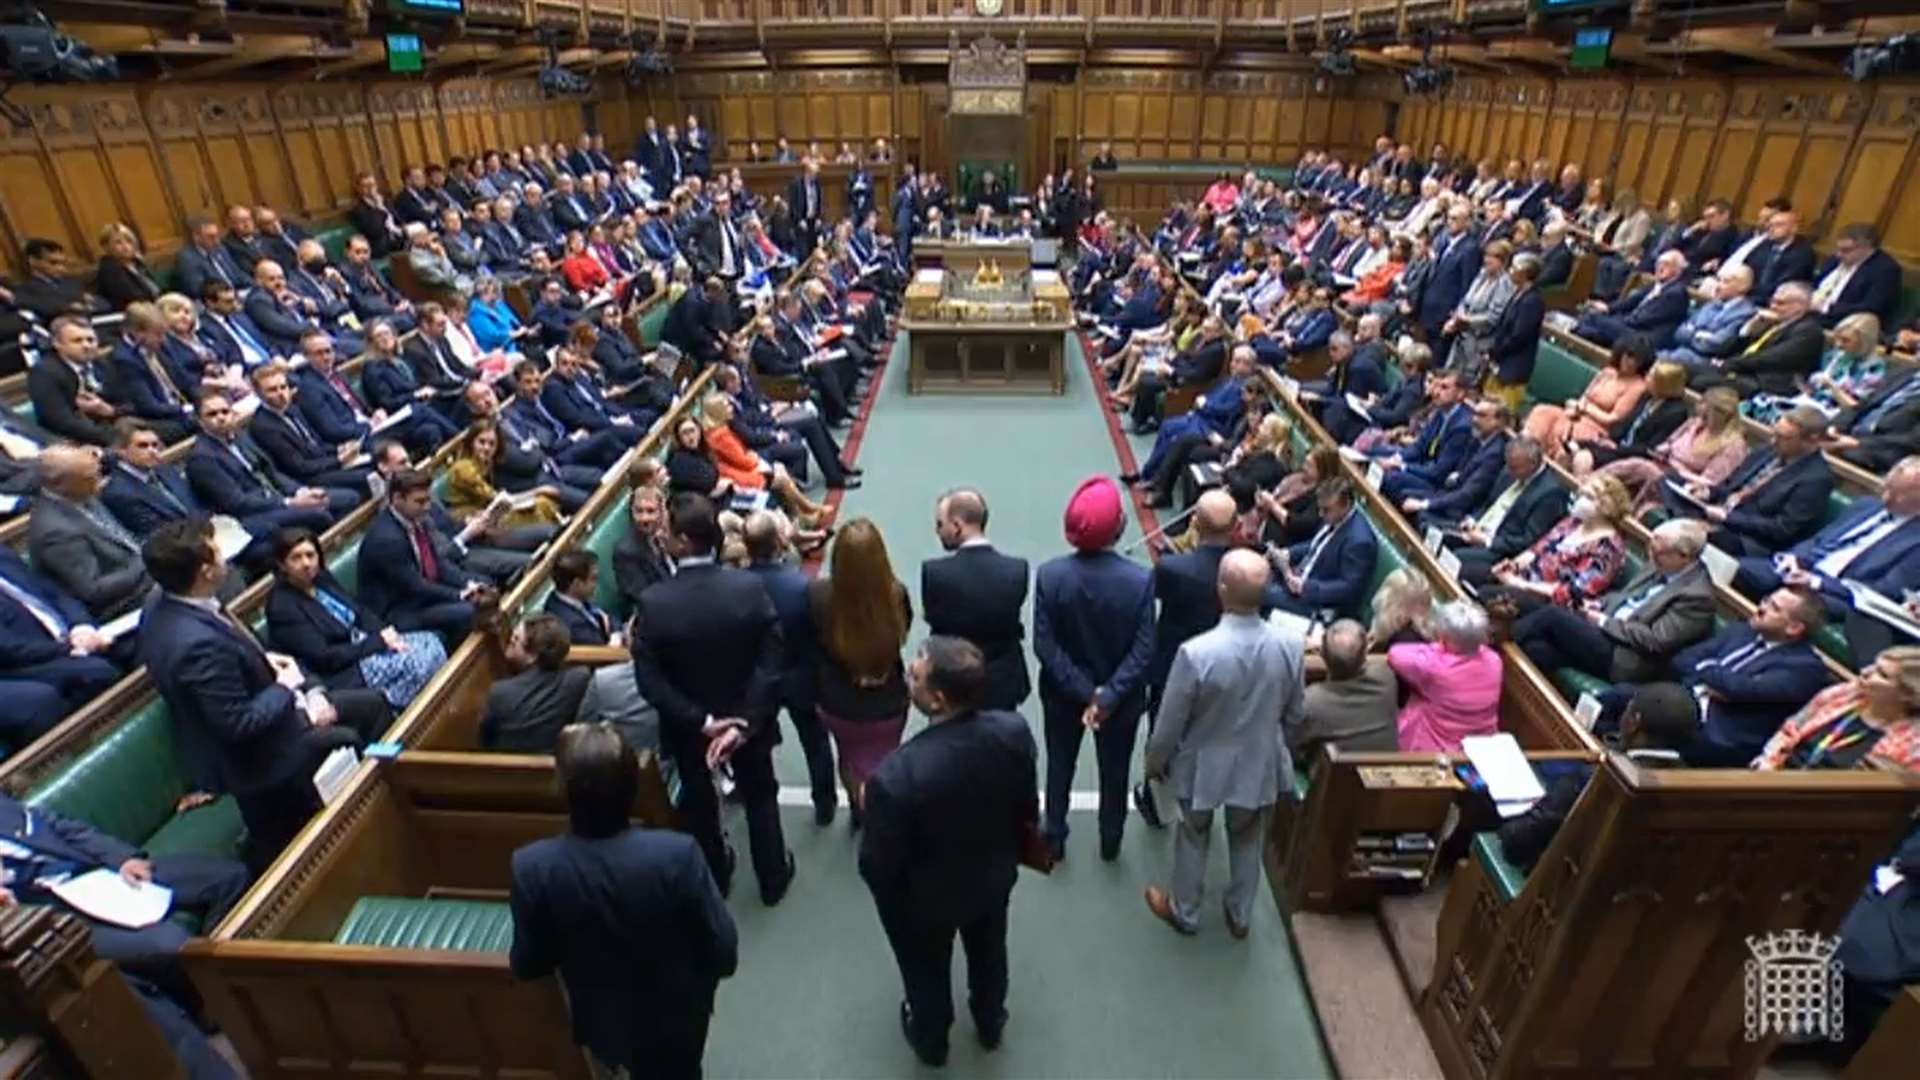 Prime Minister’s Questions in the House of Commons (House of Commons/PA)